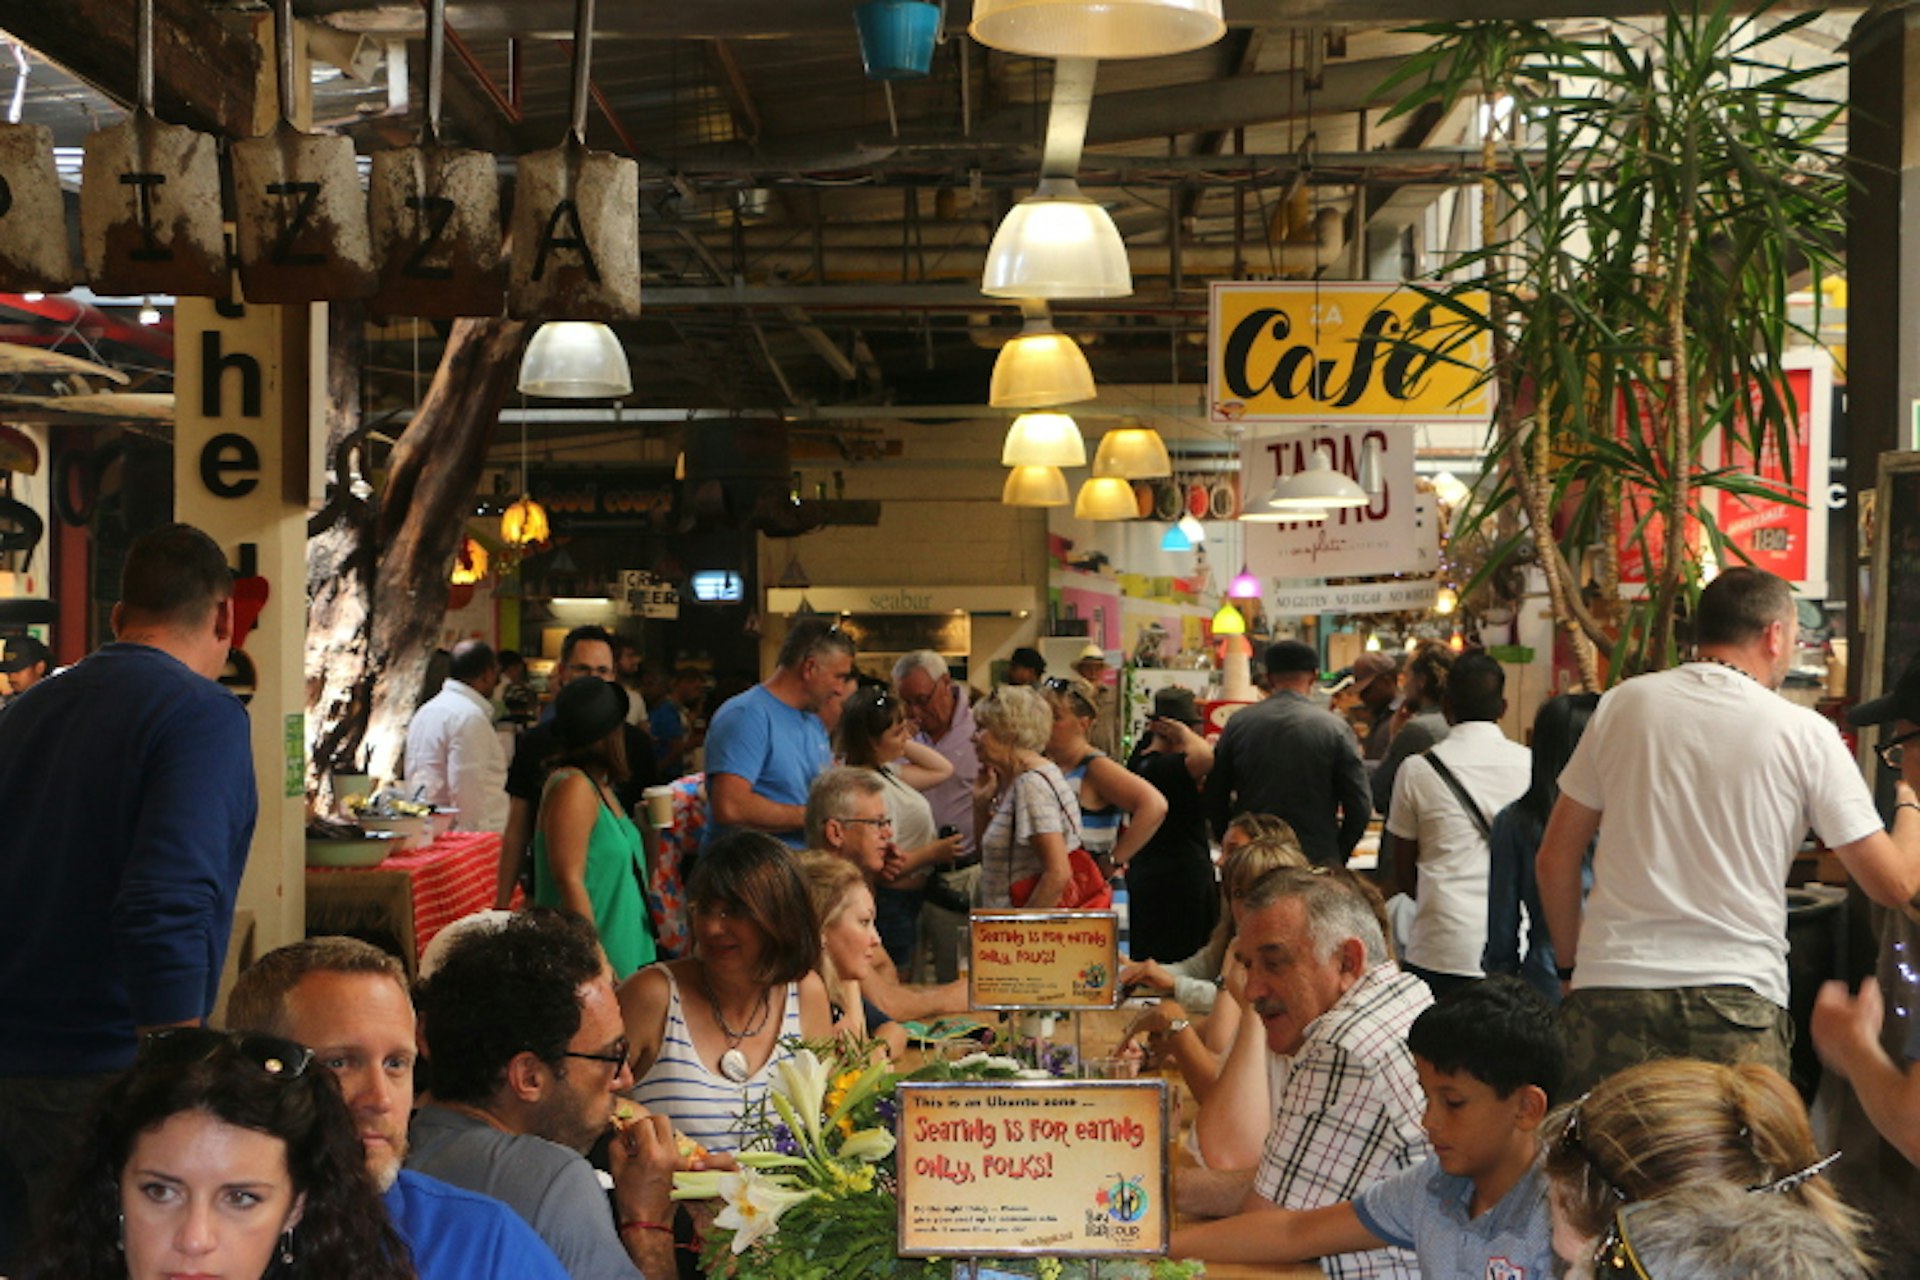 Crowds sit around tables and peruse goods in a very warm atmosphere.